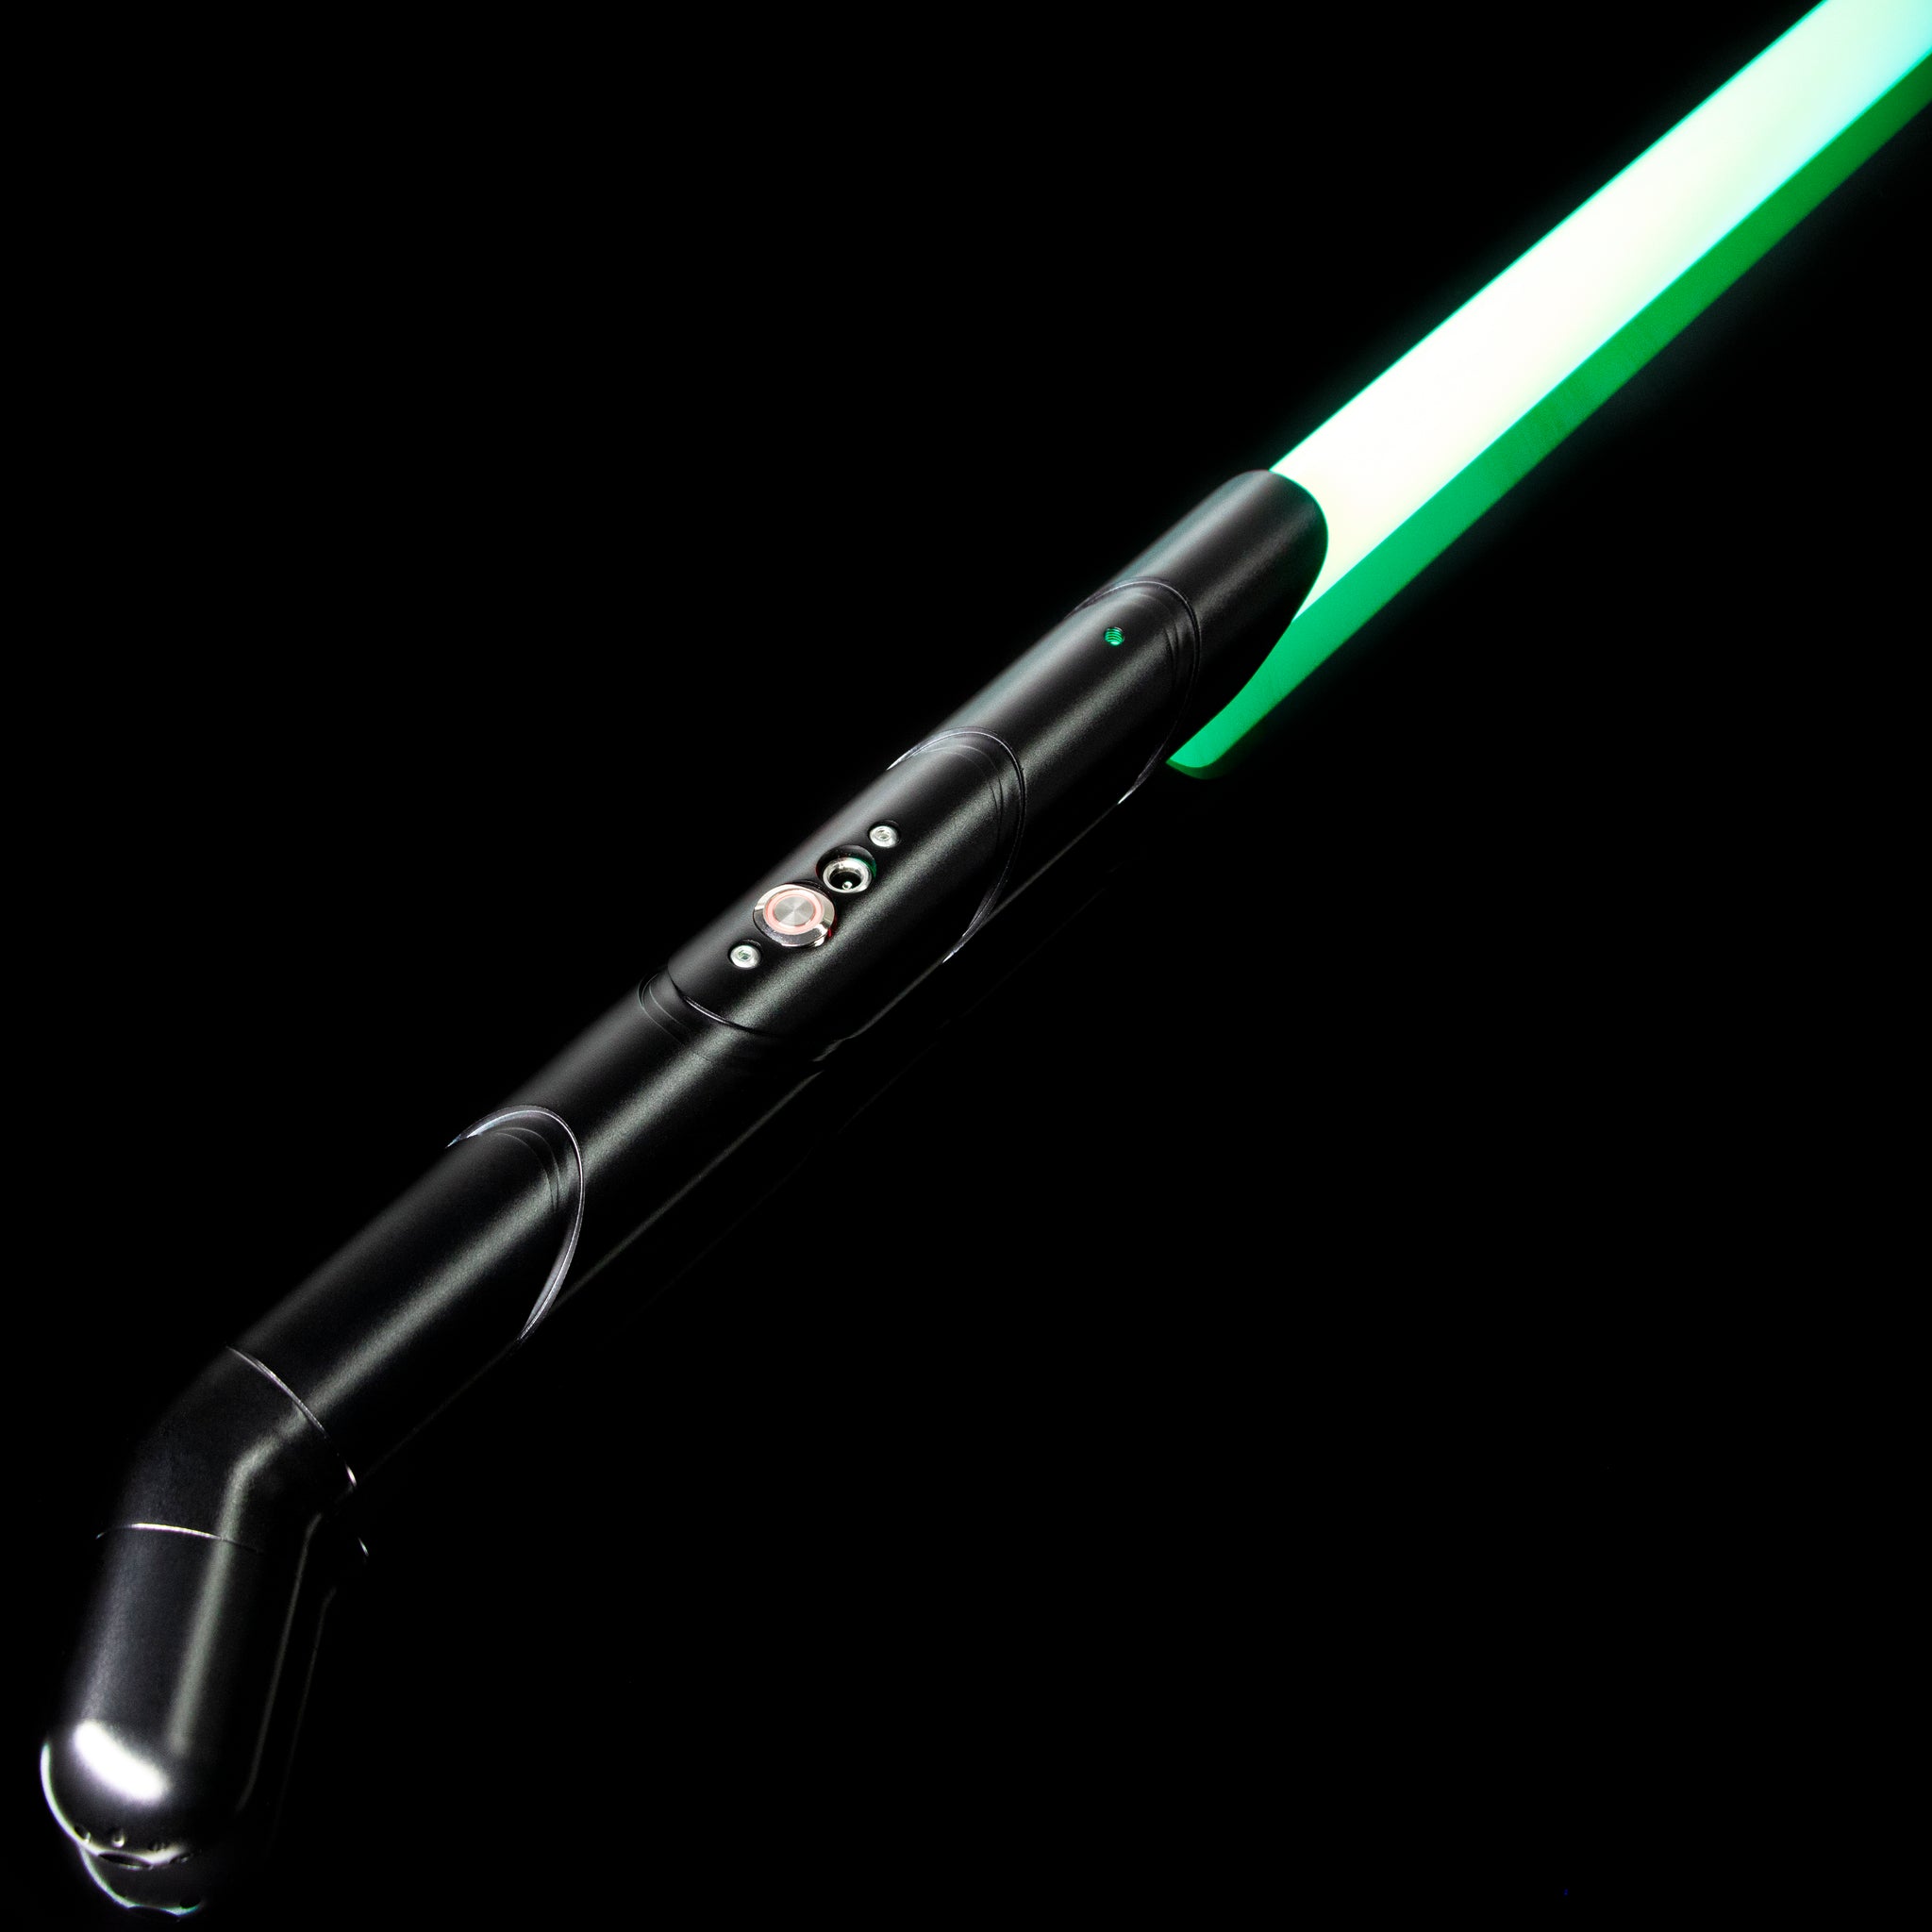 The Countless - Curved Saber